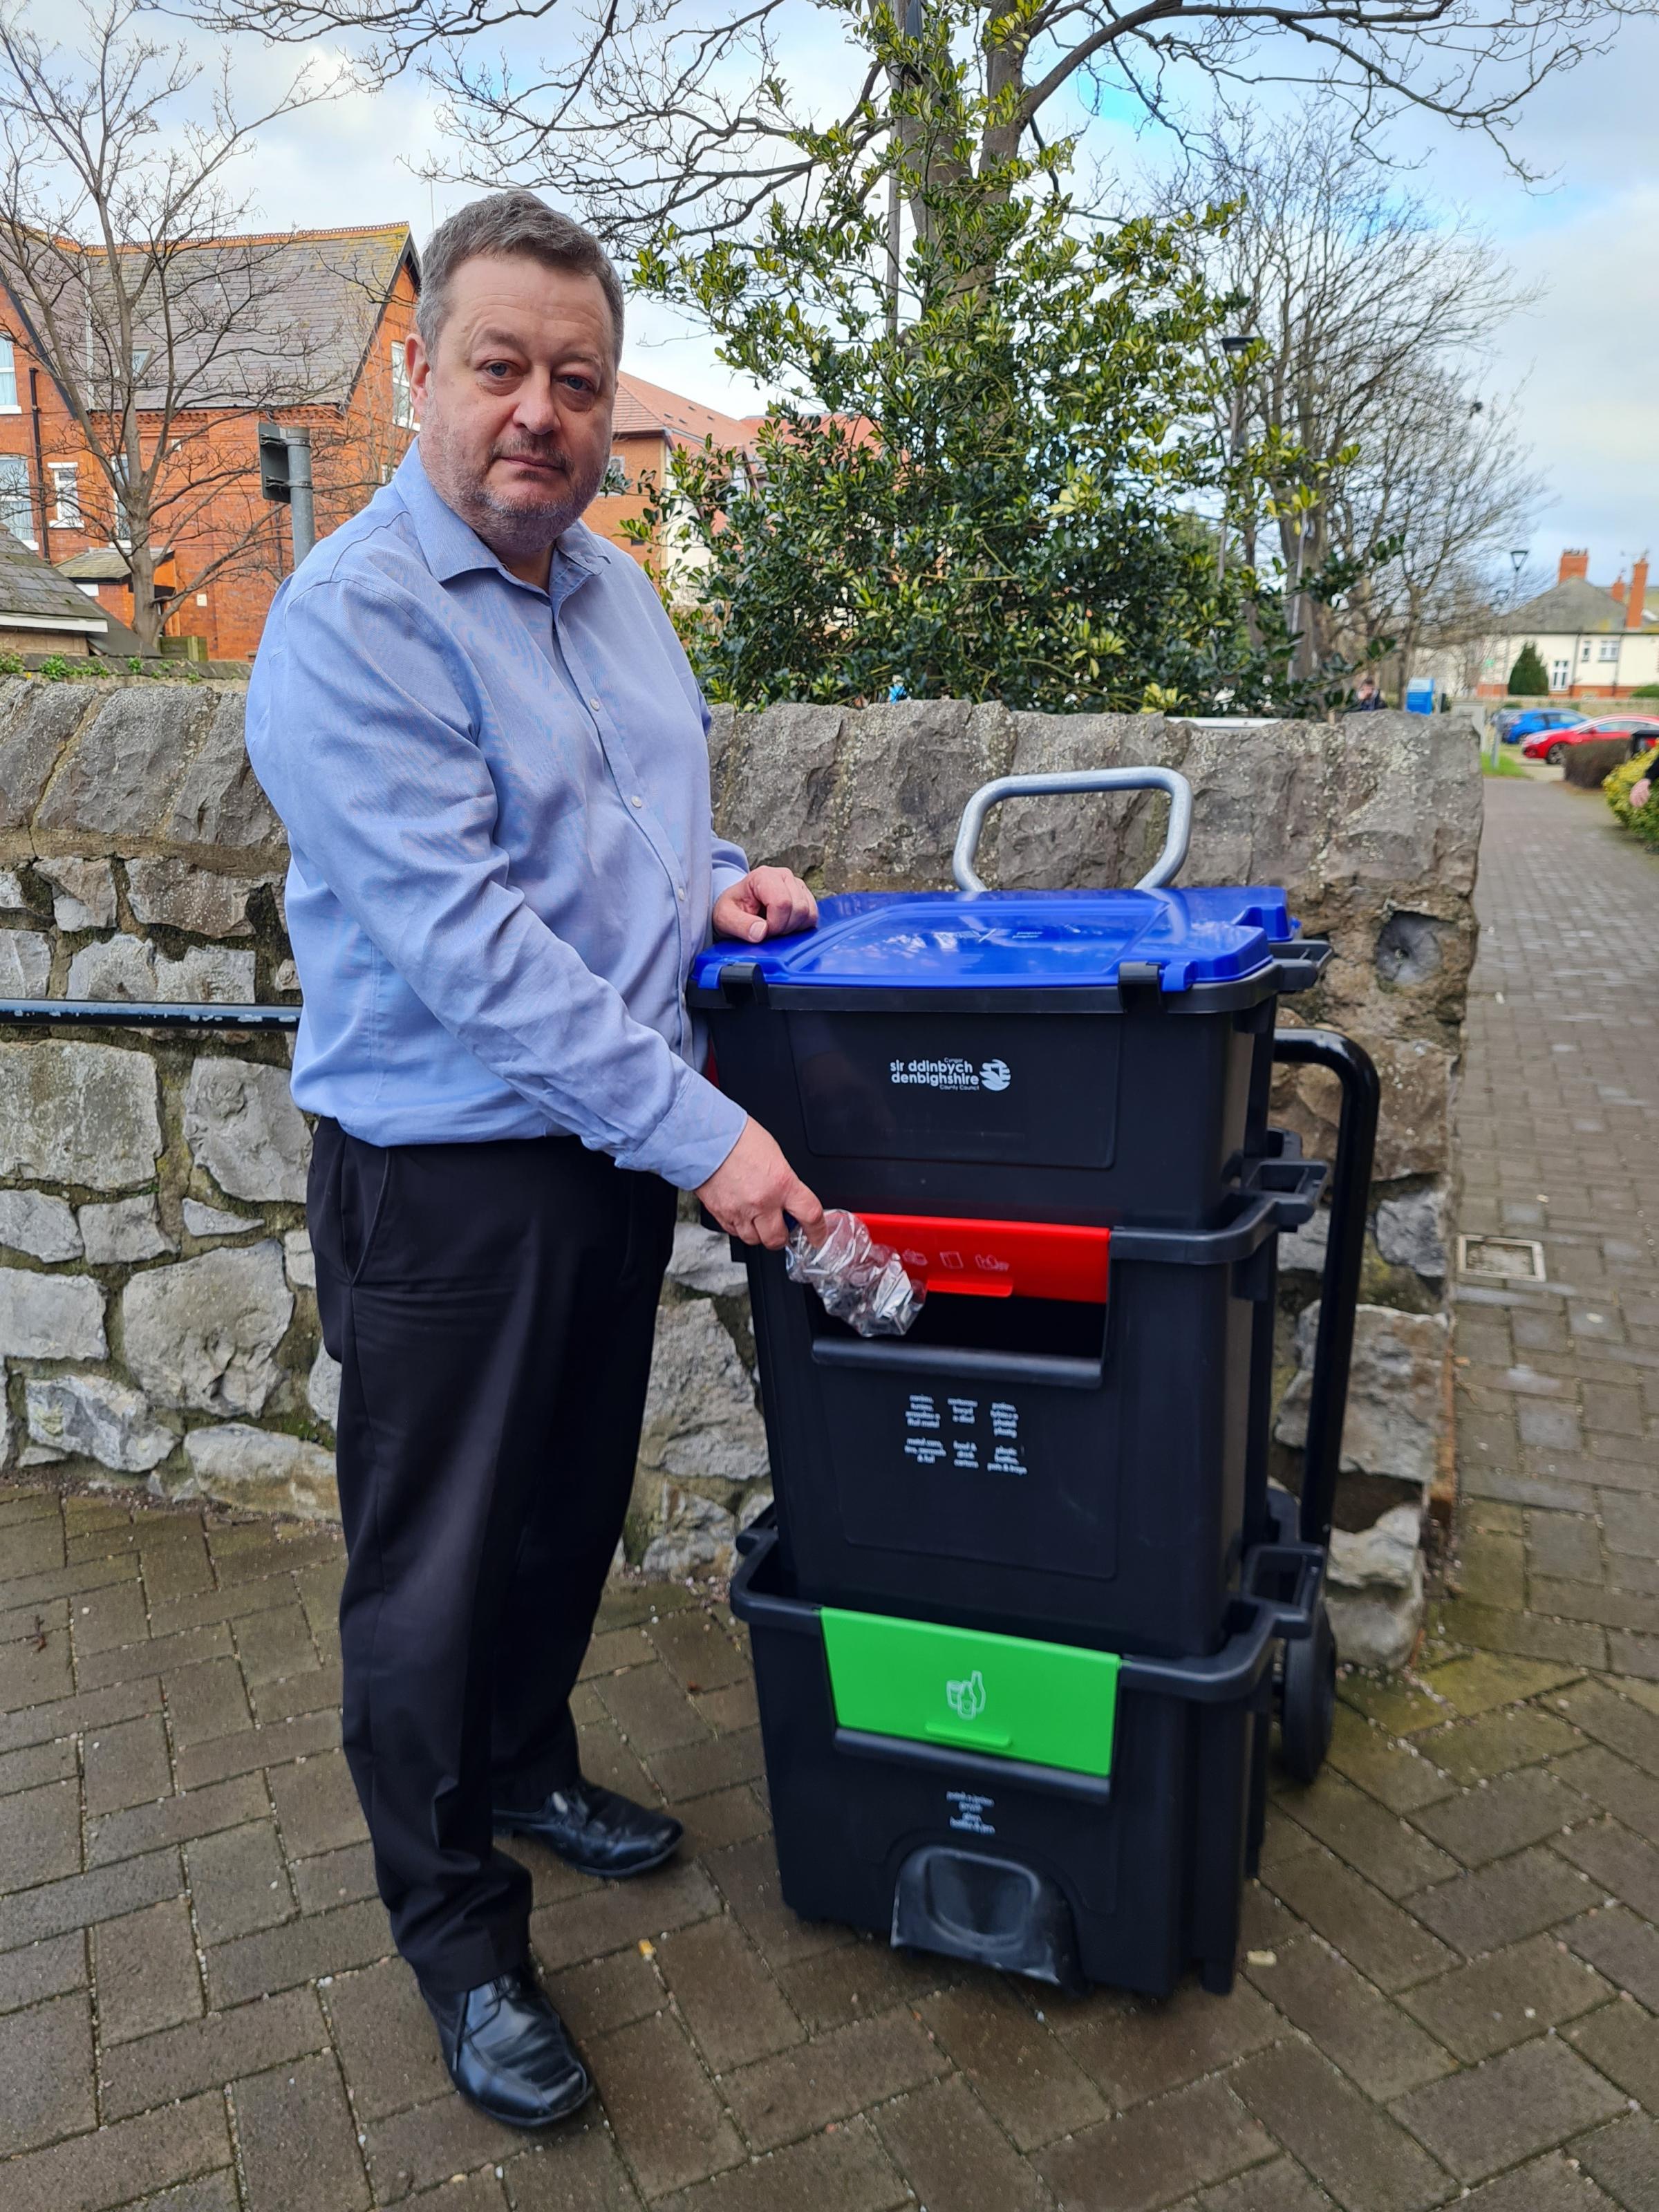 Denbighshire leader Cllr Jason McLellan with one of the councils new recycling ‘Trolibocs on wheels’ - to replace their blue bin..